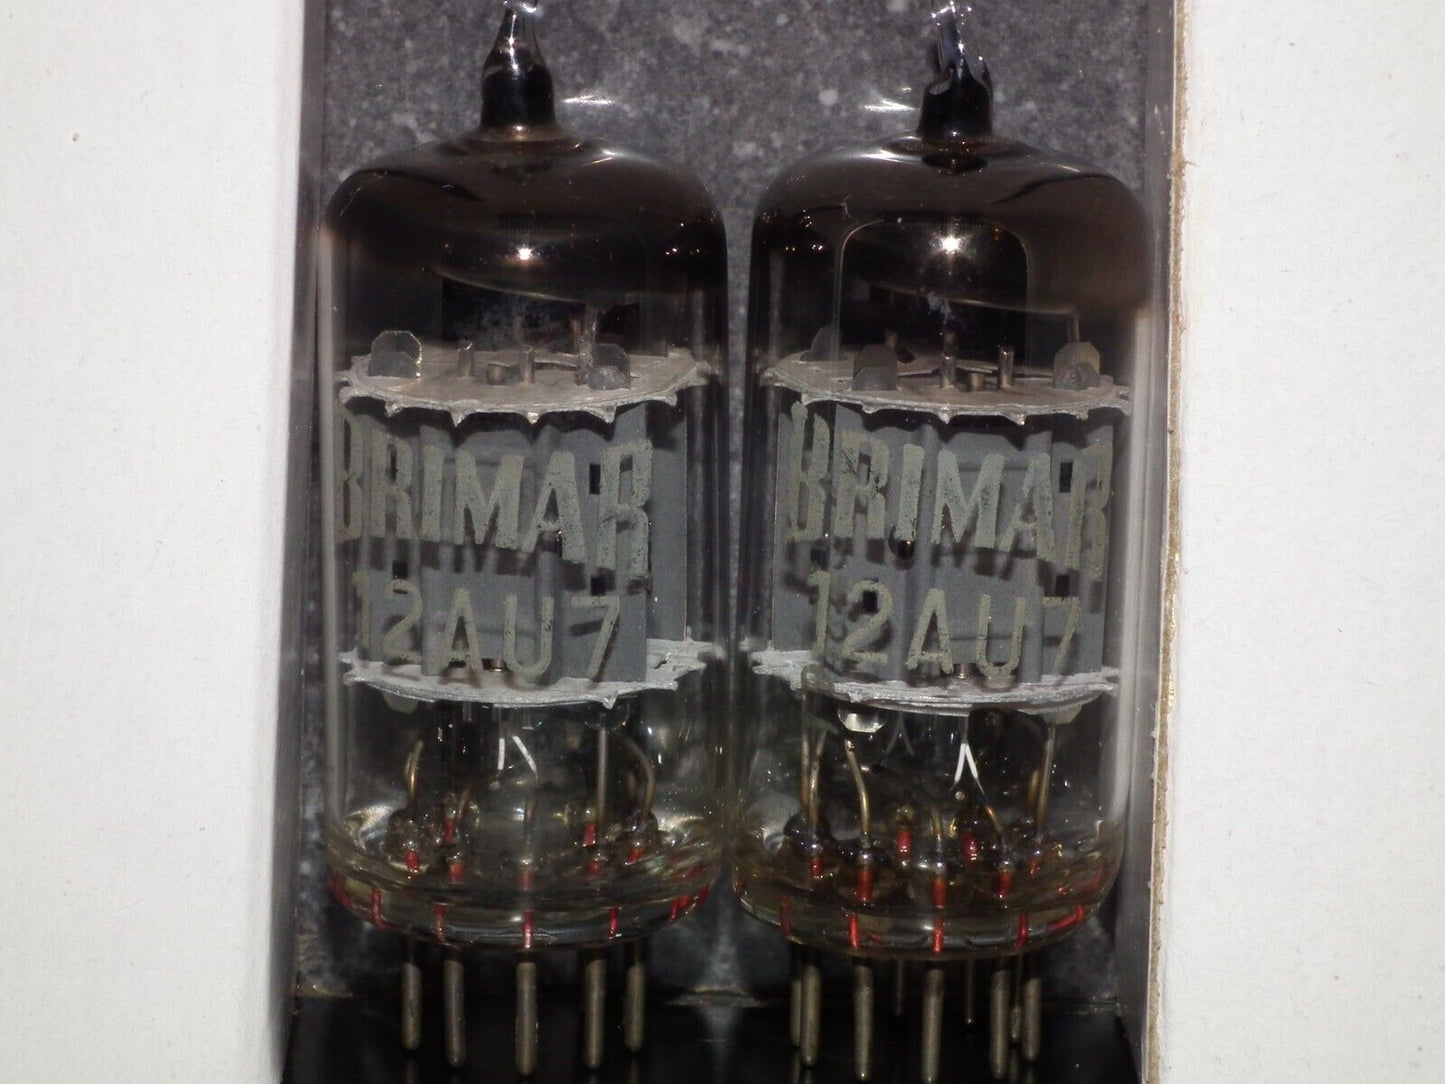 Matched Pair BRIMAR 12AU7 ECC82 Made In England Used 95%